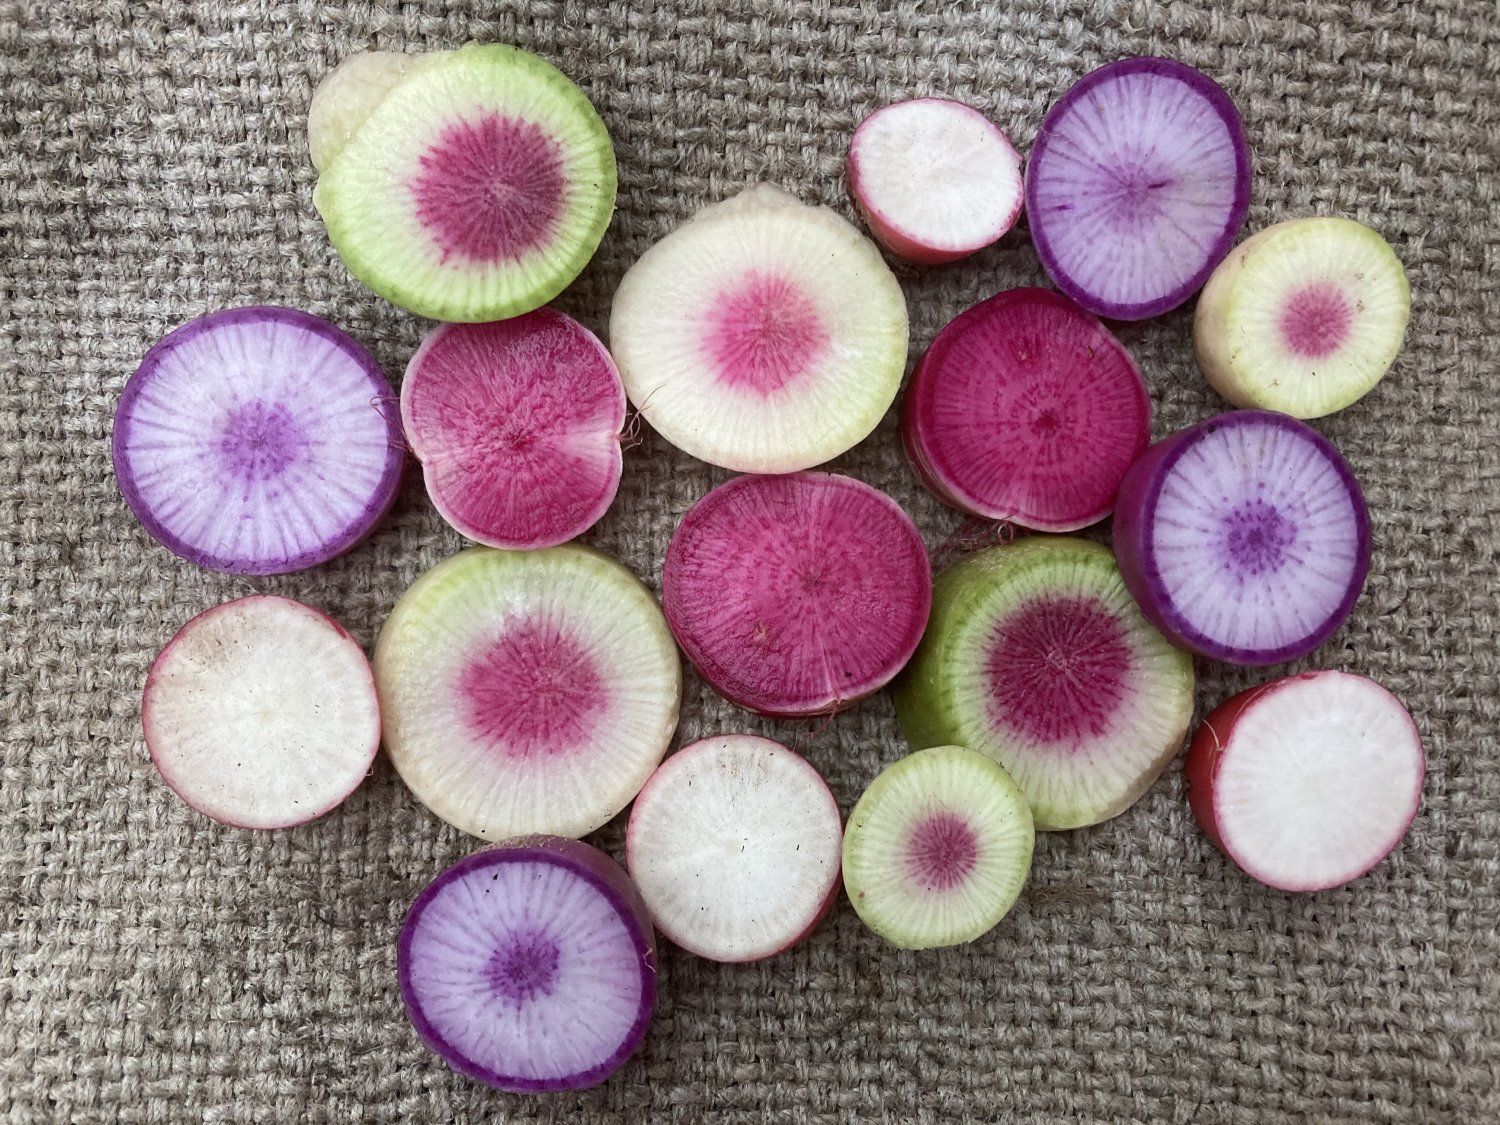 Previous Happening: All About Radishes!